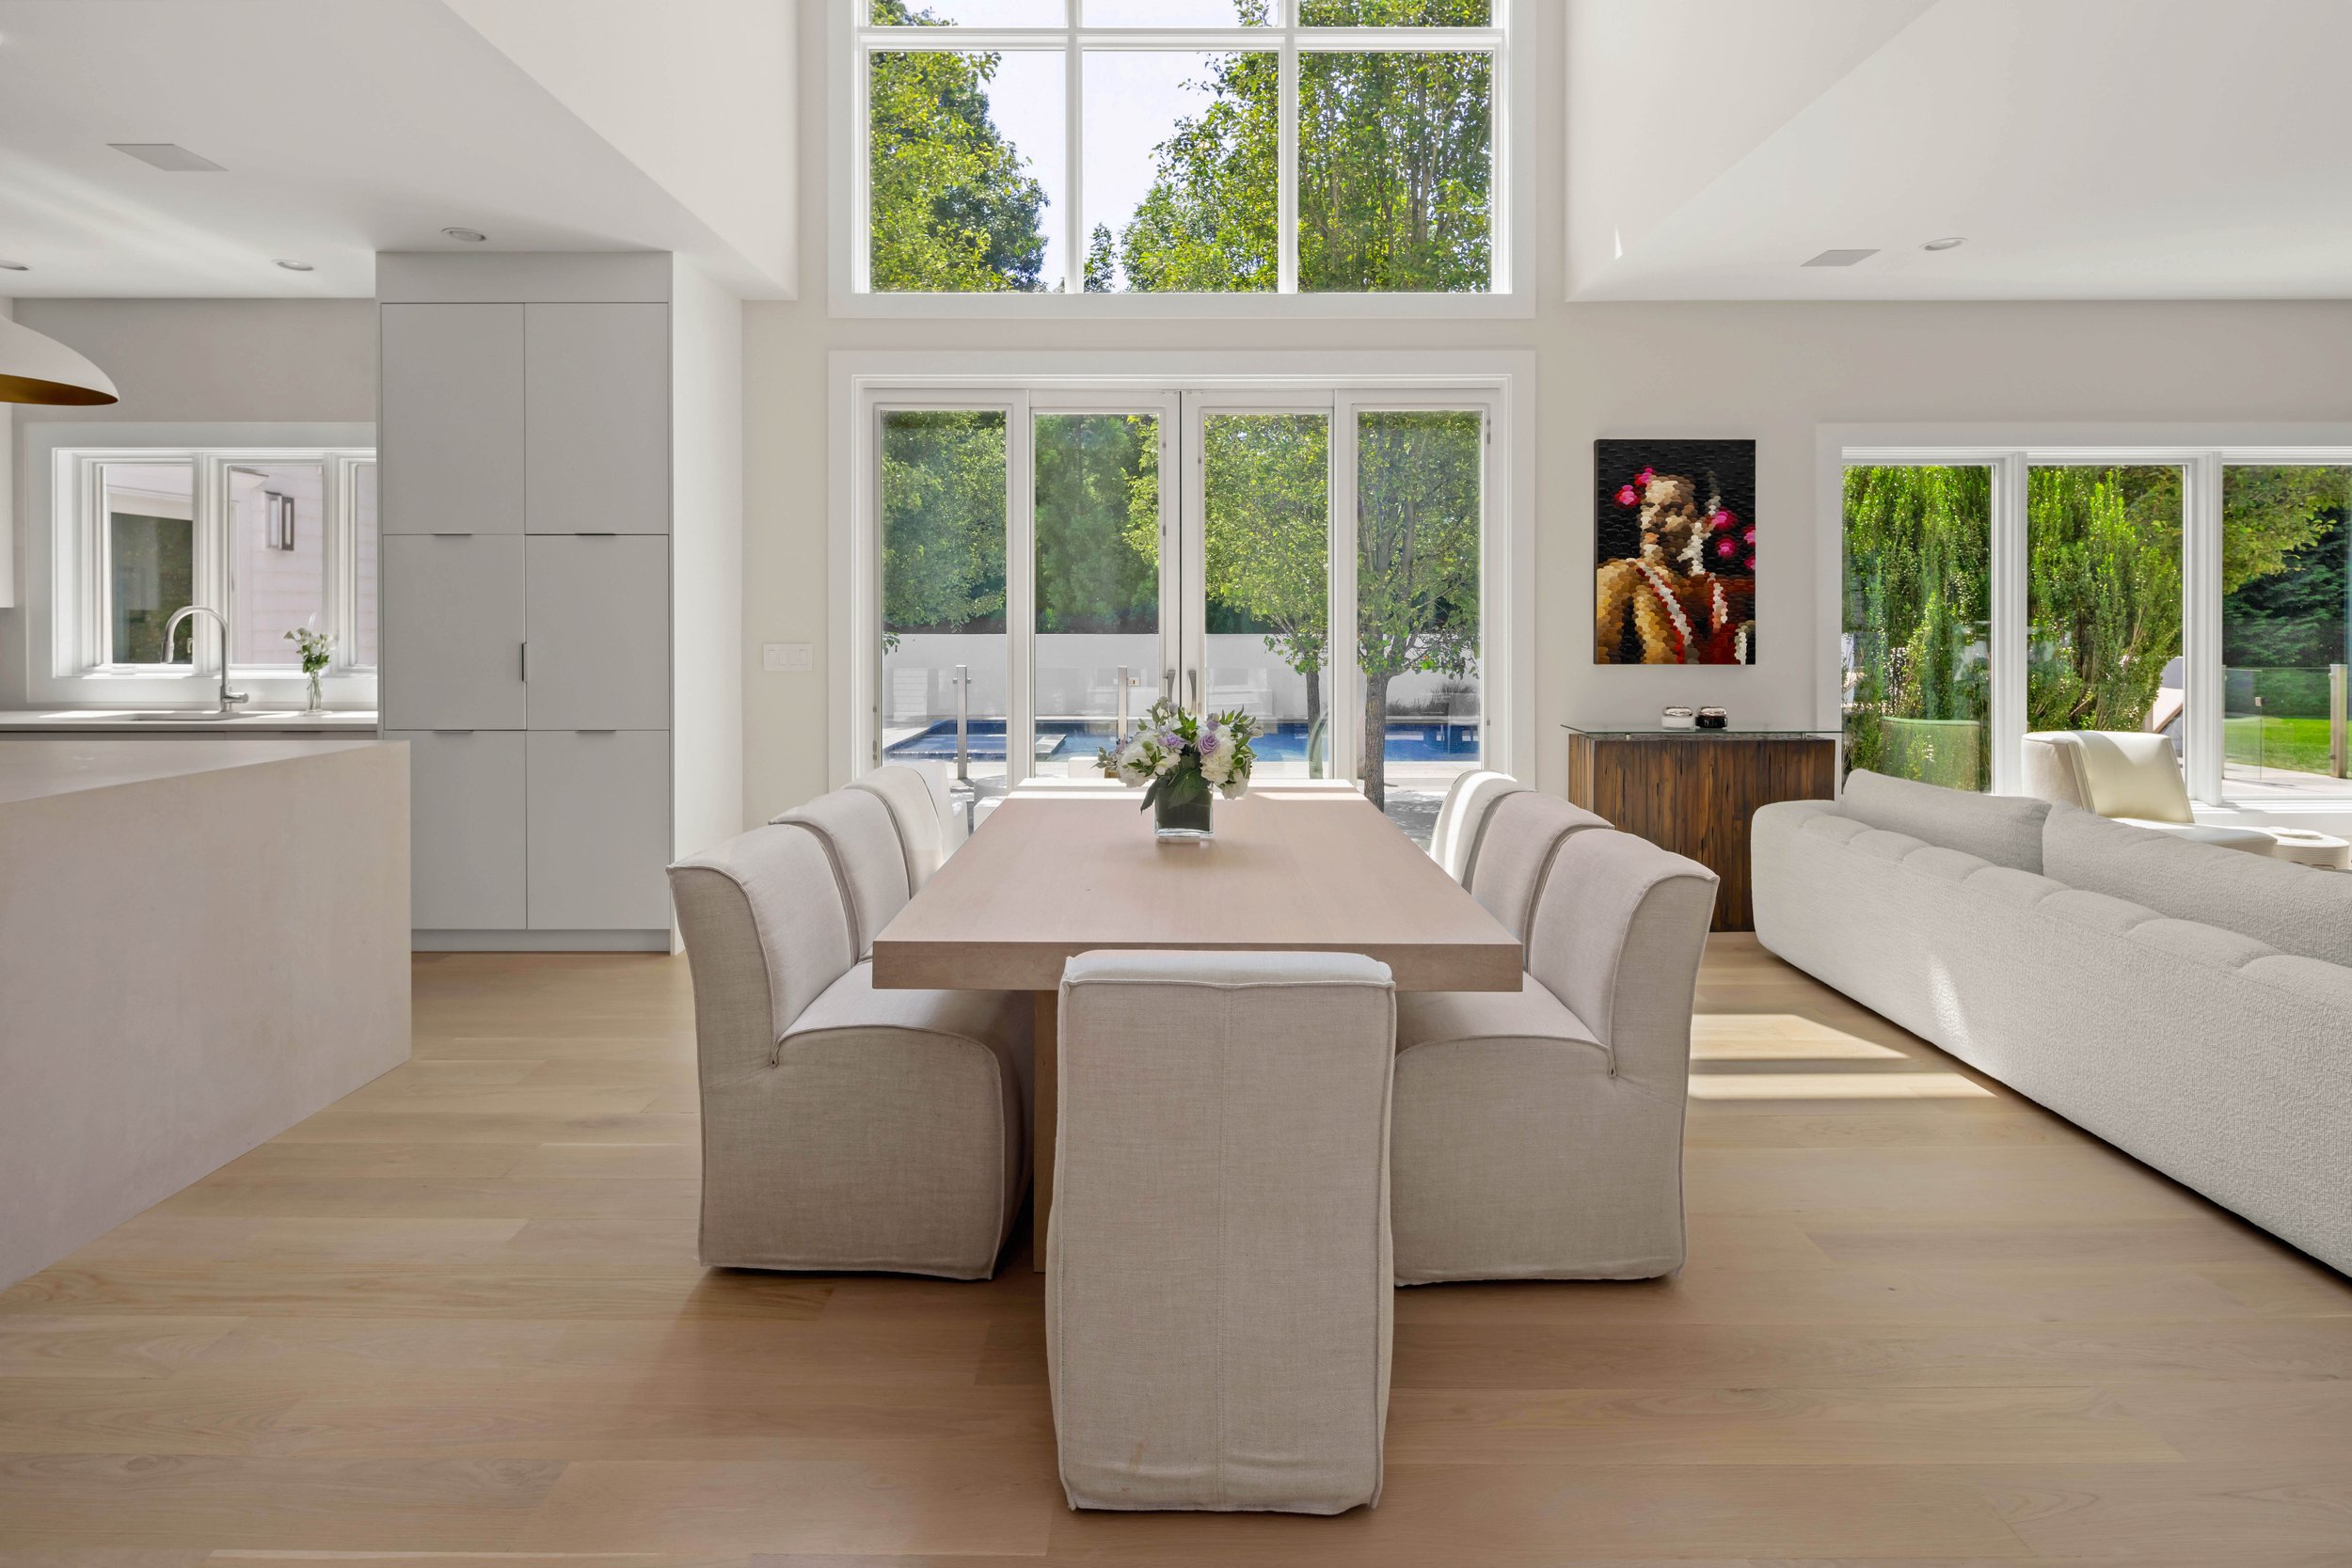 Dining area to outdoors at 55 Sturges Hwy, Westport, CT 06880-20.jpg